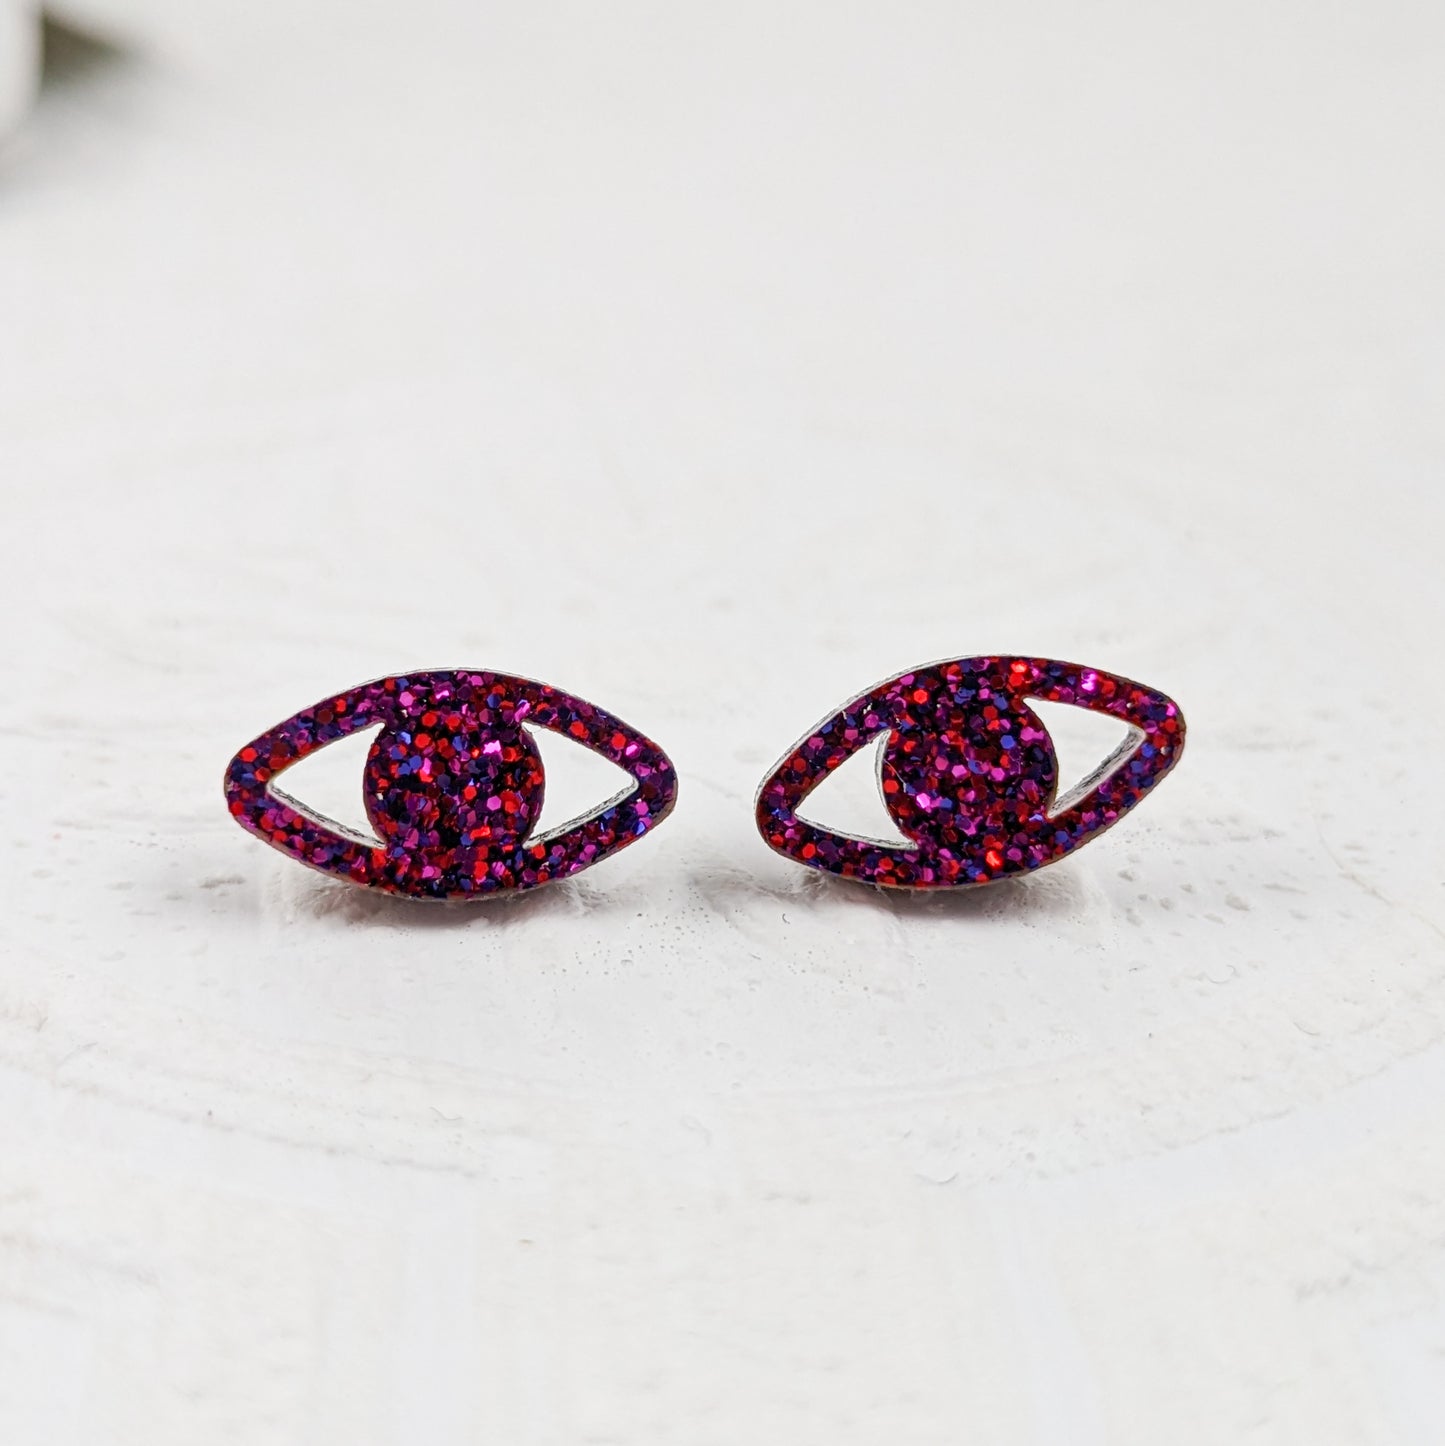 Peepers - Eye shaped stud earrings made with ruby sparkle acrylic and stainless steel posts